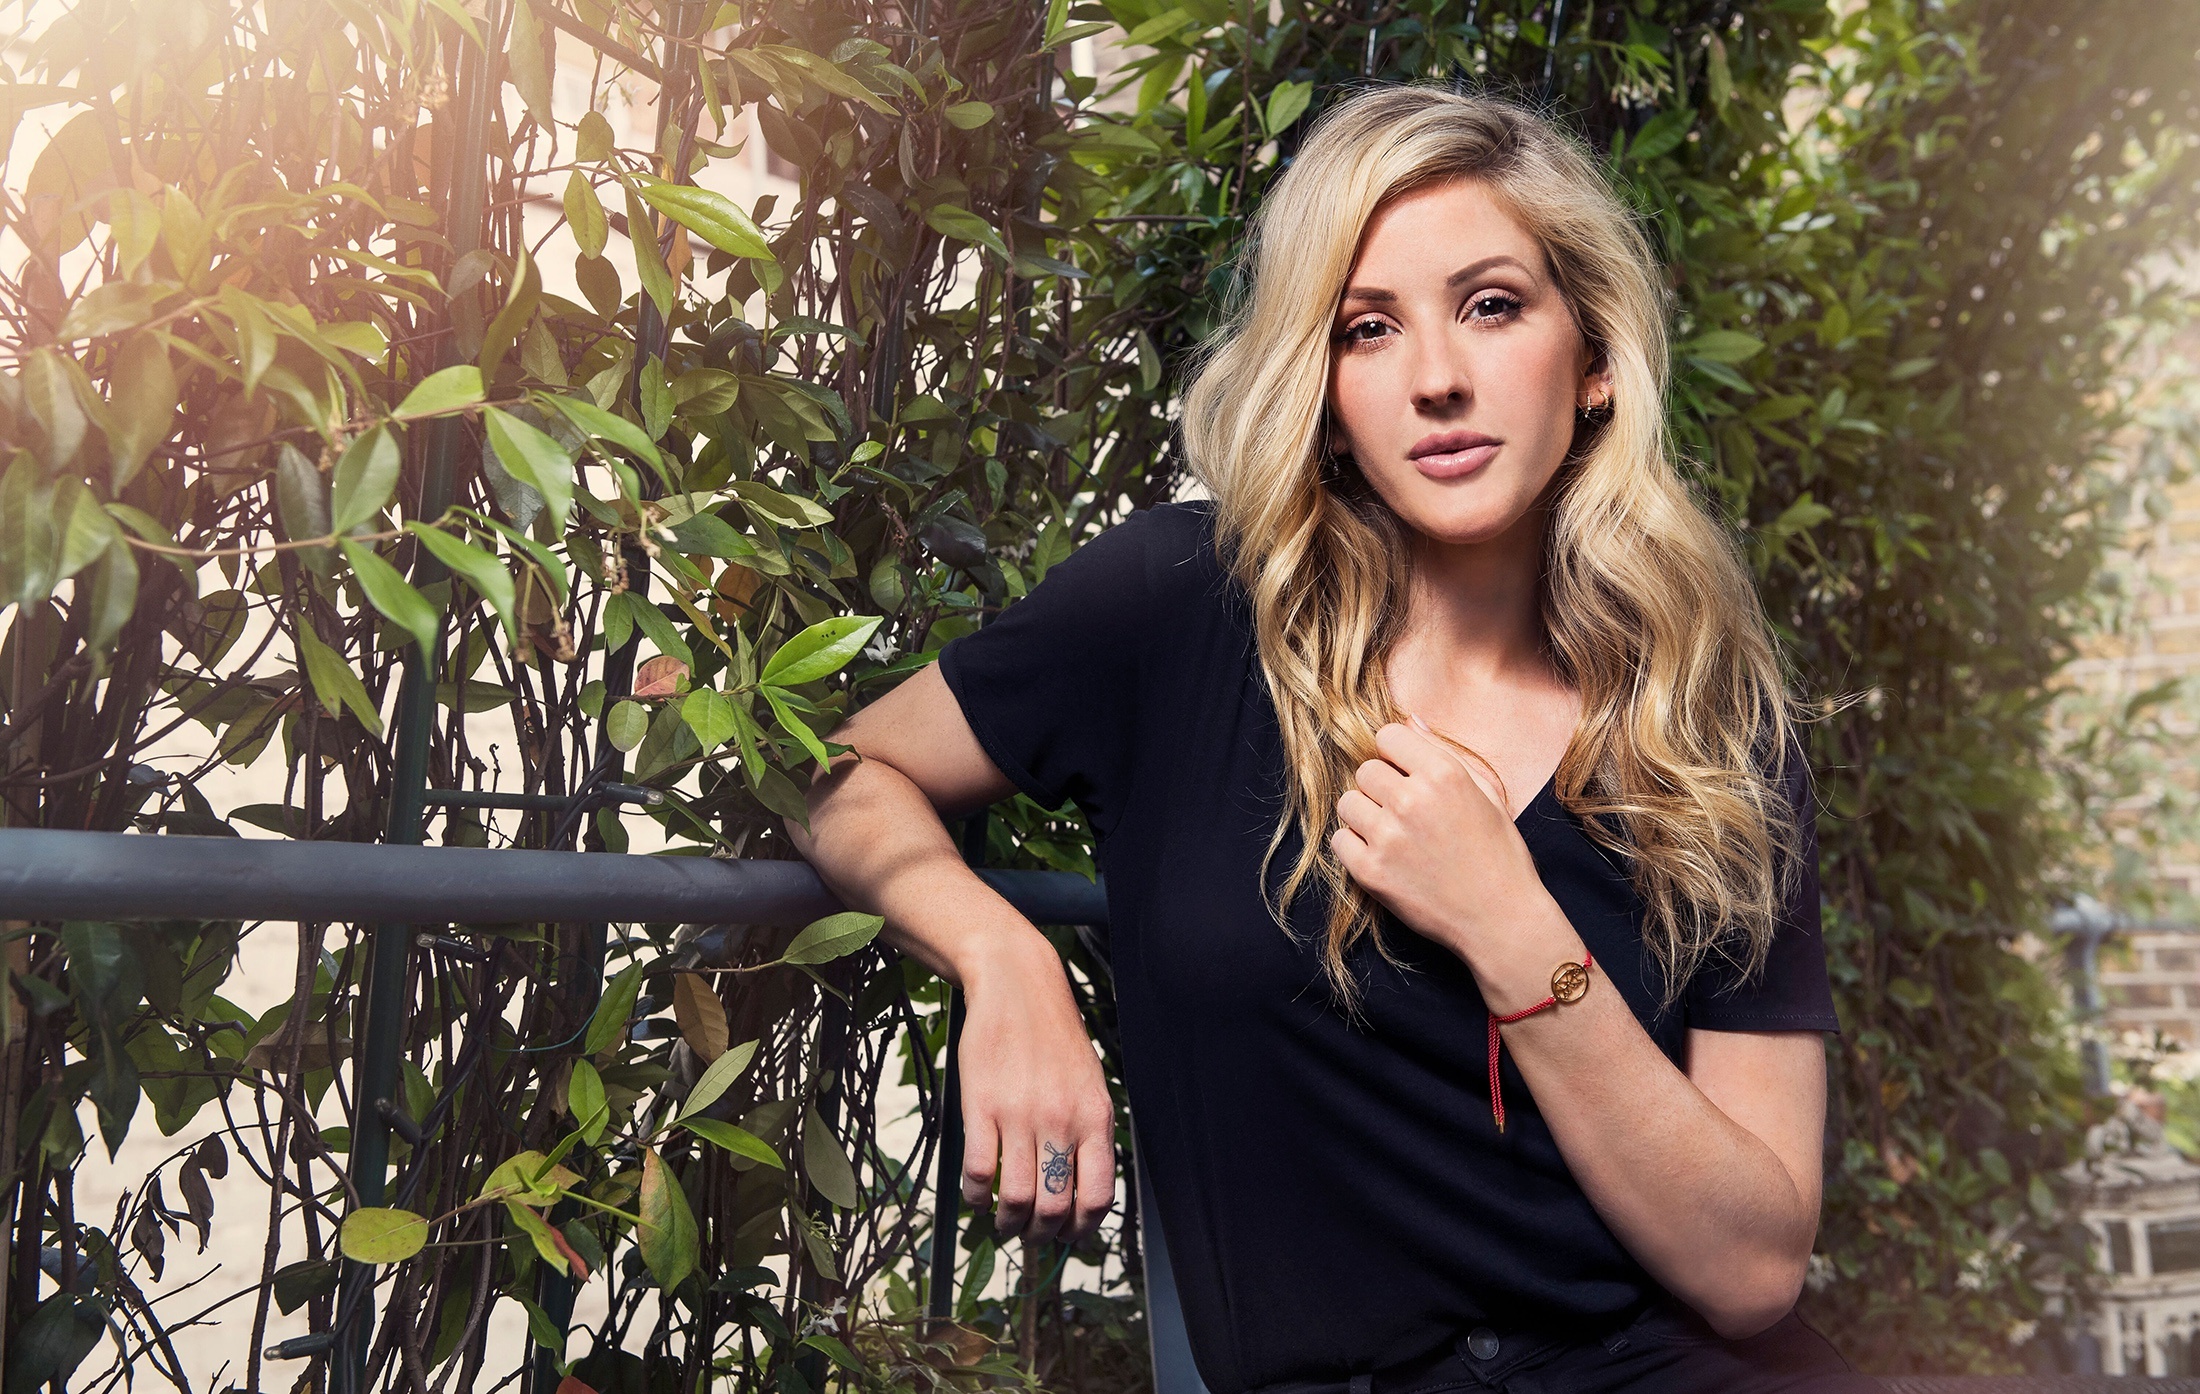 Ellie Goulding: "Love Me like You Do" was recorded for the film Fifty Shades of Grey (2015). 2200x1400 HD Wallpaper.